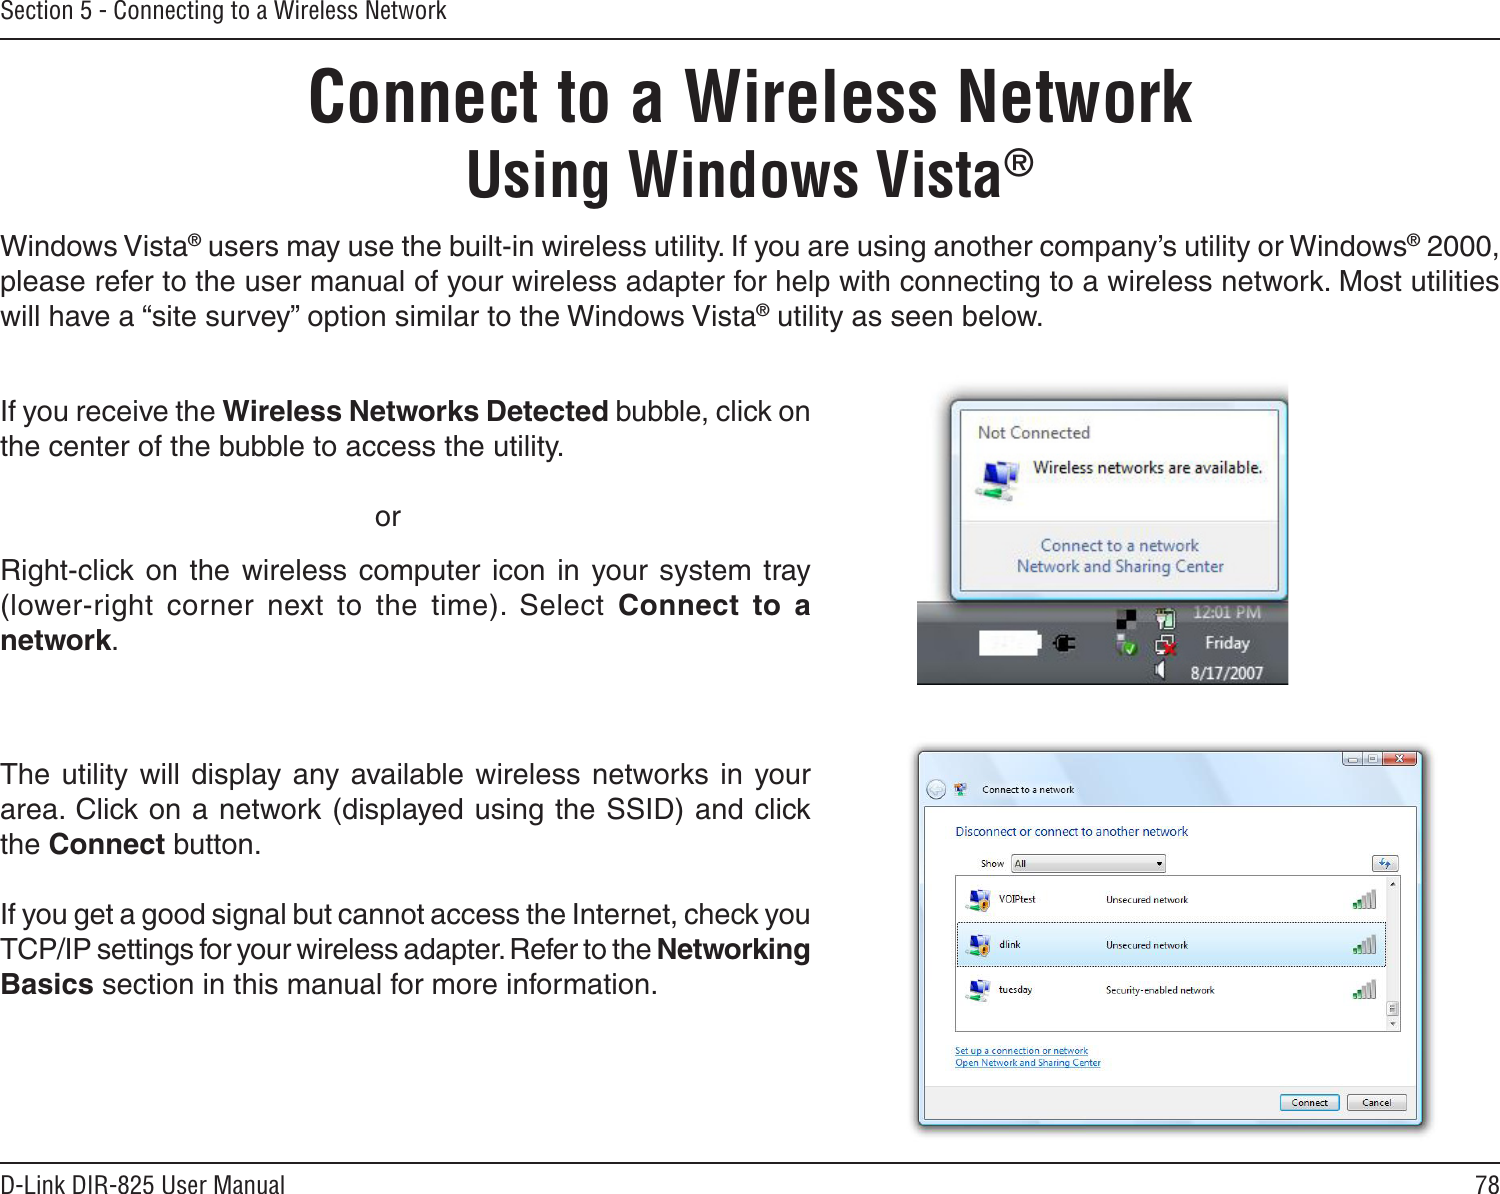 78D-Link DIR-825 User ManualSection 5 - Connecting to a Wireless NetworkConnect to a Wireless NetworkUsing Windows Vista®Windows Vista® users may use the built-in wireless utility. If you are using another company’s utility or Windows® 2000, please refer to the user manual of your wireless adapter for help with connecting to a wireless network. Most utilities will have a “site survey” option similar to the Windows Vista® utility as seen below.Right-click  on the wireless computer  icon  in  your system  tray (lower-right  corner  next  to  the  time).  Select  Connect  to  a network.If you receive the Wireless Networks Detected bubble, click on the center of the bubble to access the utility.     orThe utility  will  display  any available  wireless networks  in your area. Click on a network (displayed using the SSID) and click the Connect button.If you get a good signal but cannot access the Internet, check you TCP/IP settings for your wireless adapter. Refer to the Networking Basics section in this manual for more information.